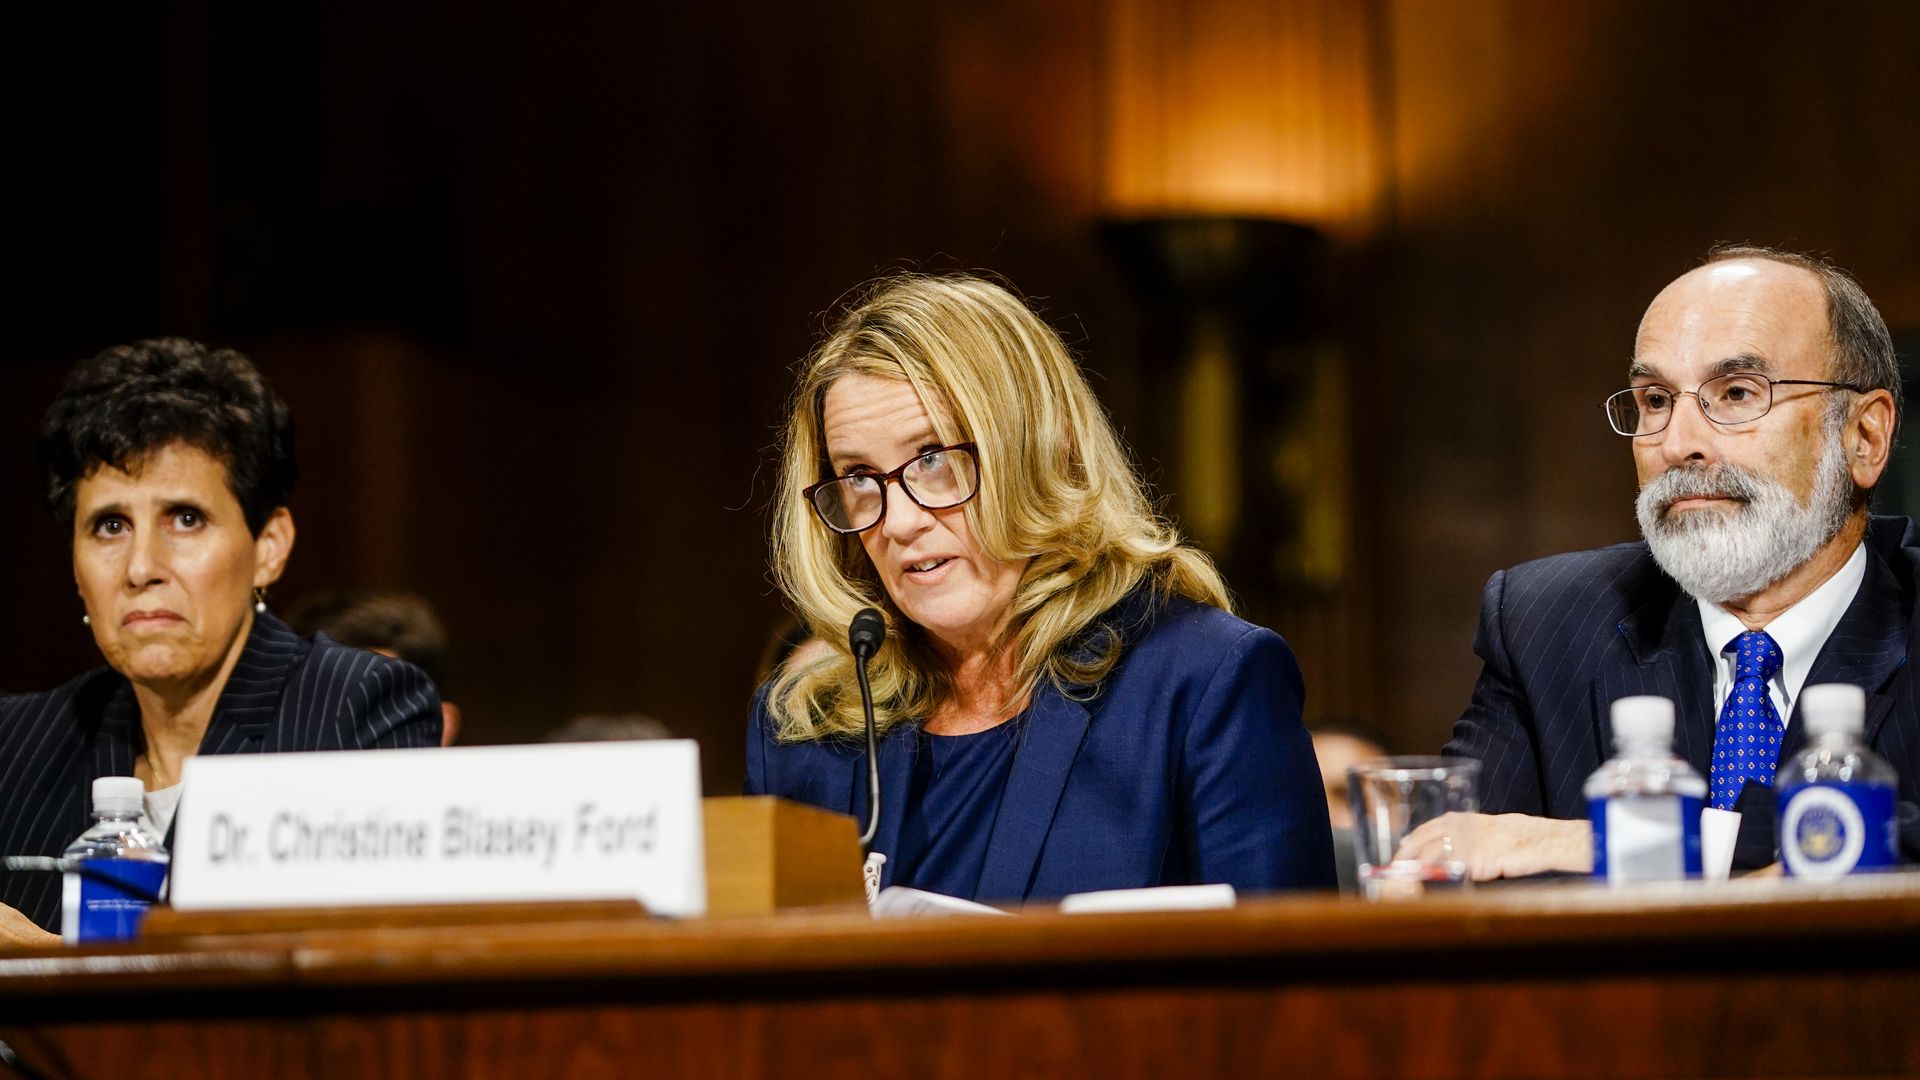 Christine Blasey Ford, with lawyers Debra S. Katz, left, and Michael R. Bromwich, answers questions at a Senate Judiciary Committee hearing 